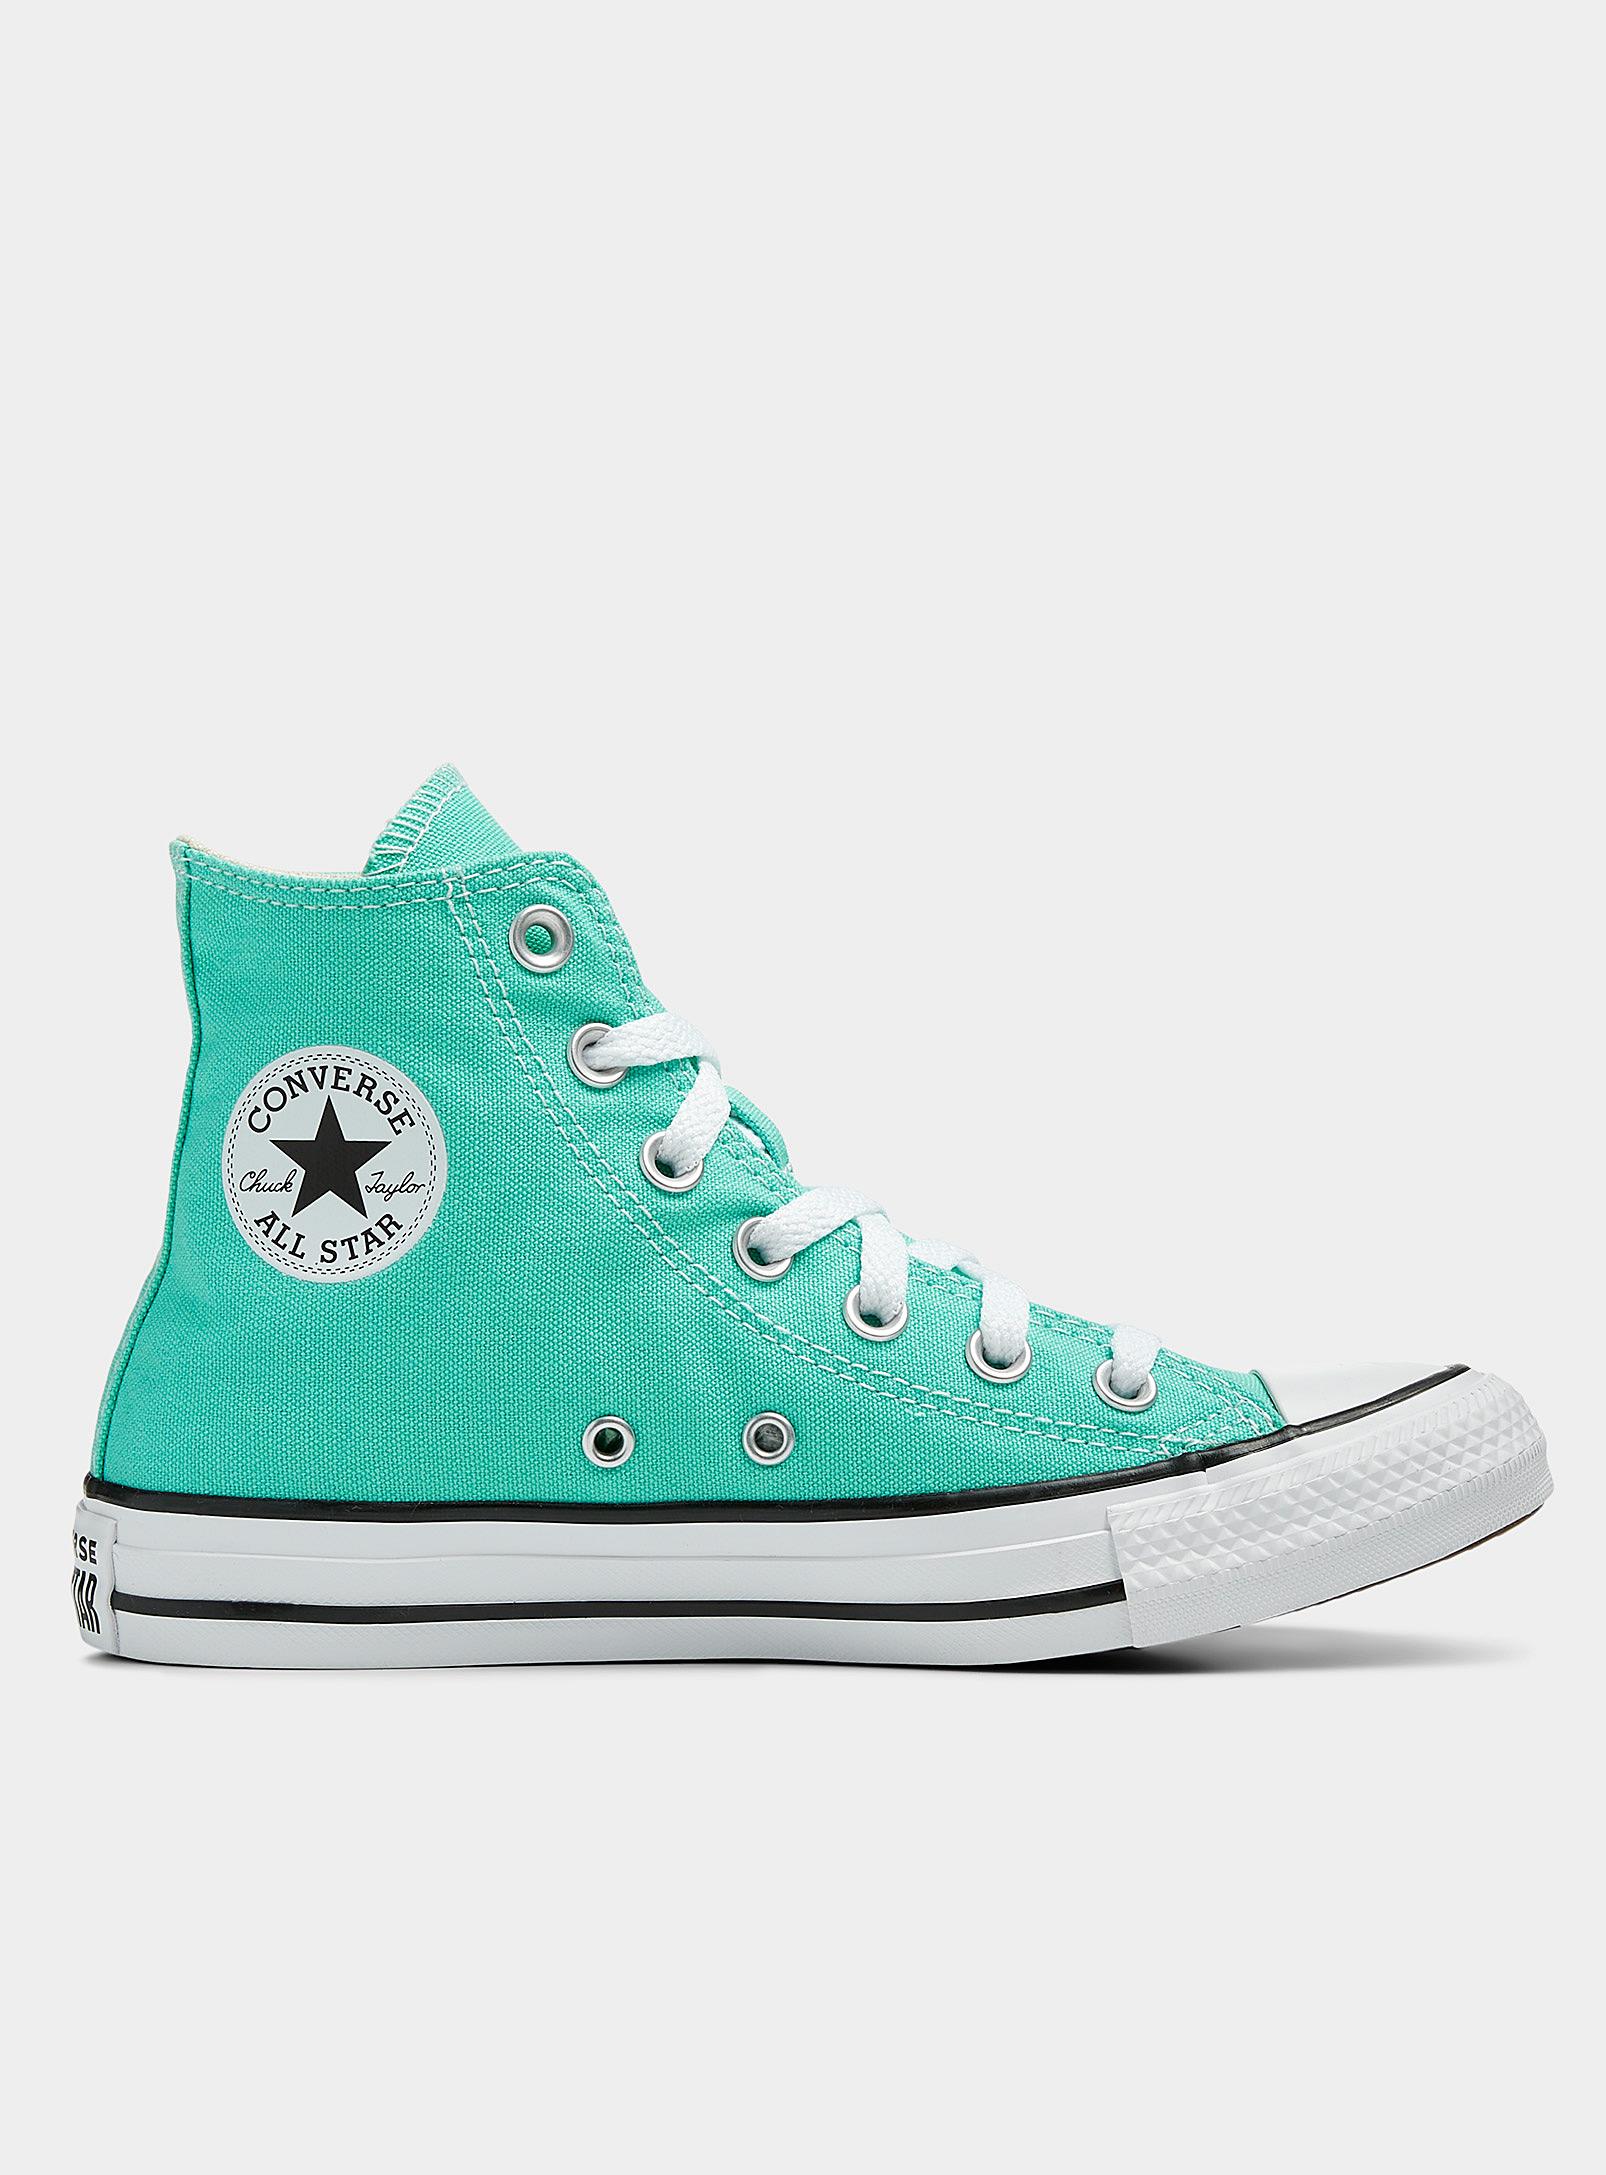 Converse Chuck Taylor All Star High Top Cyber Teal Sneakers Women in Green  | Lyst